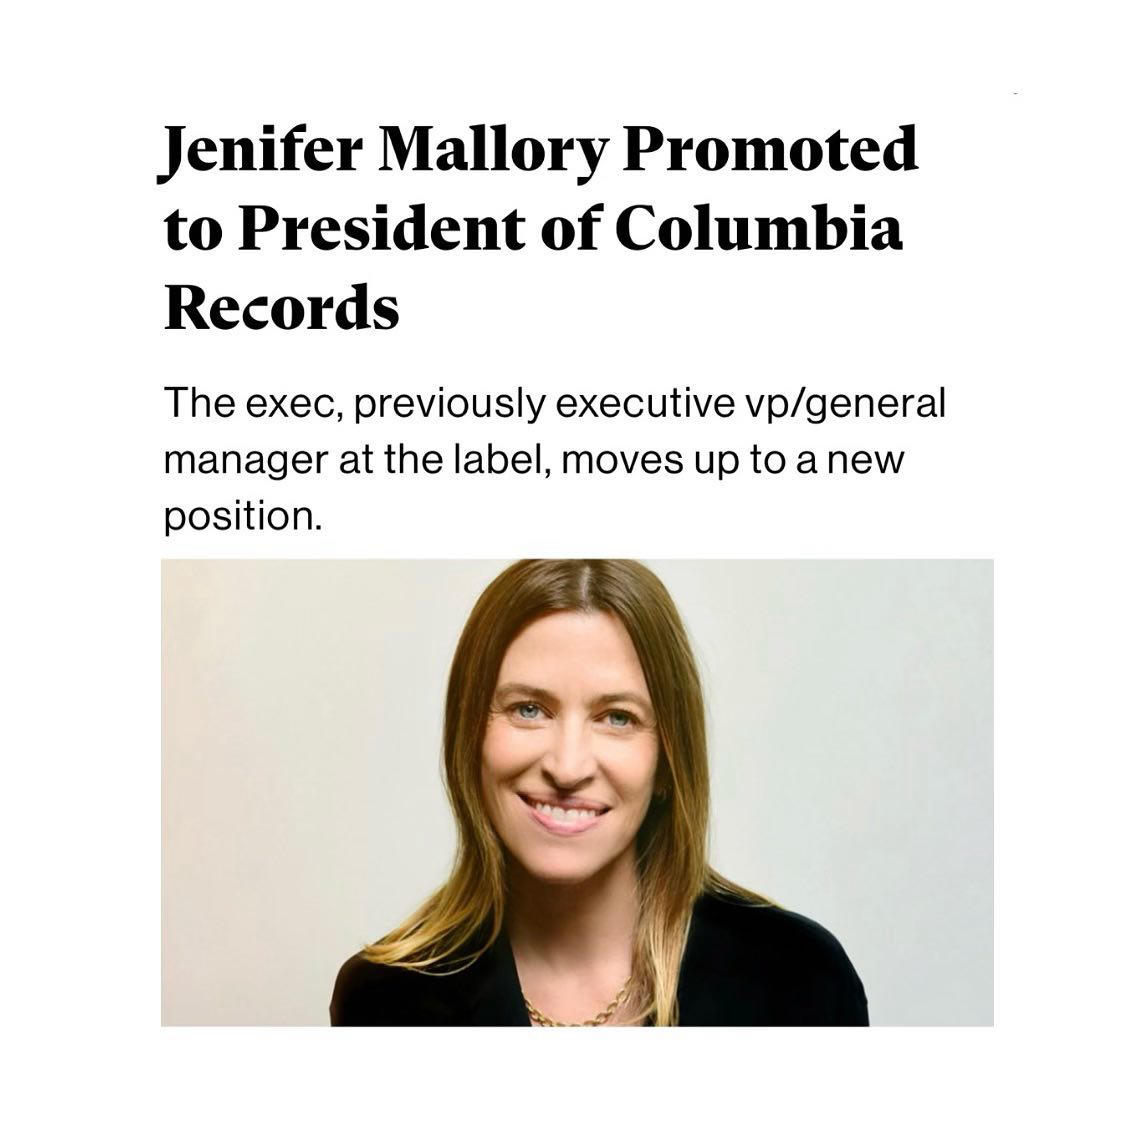 image  1 Jenifer Mallory has been promoted to President of Columbia Records as announced today by Columbia’s